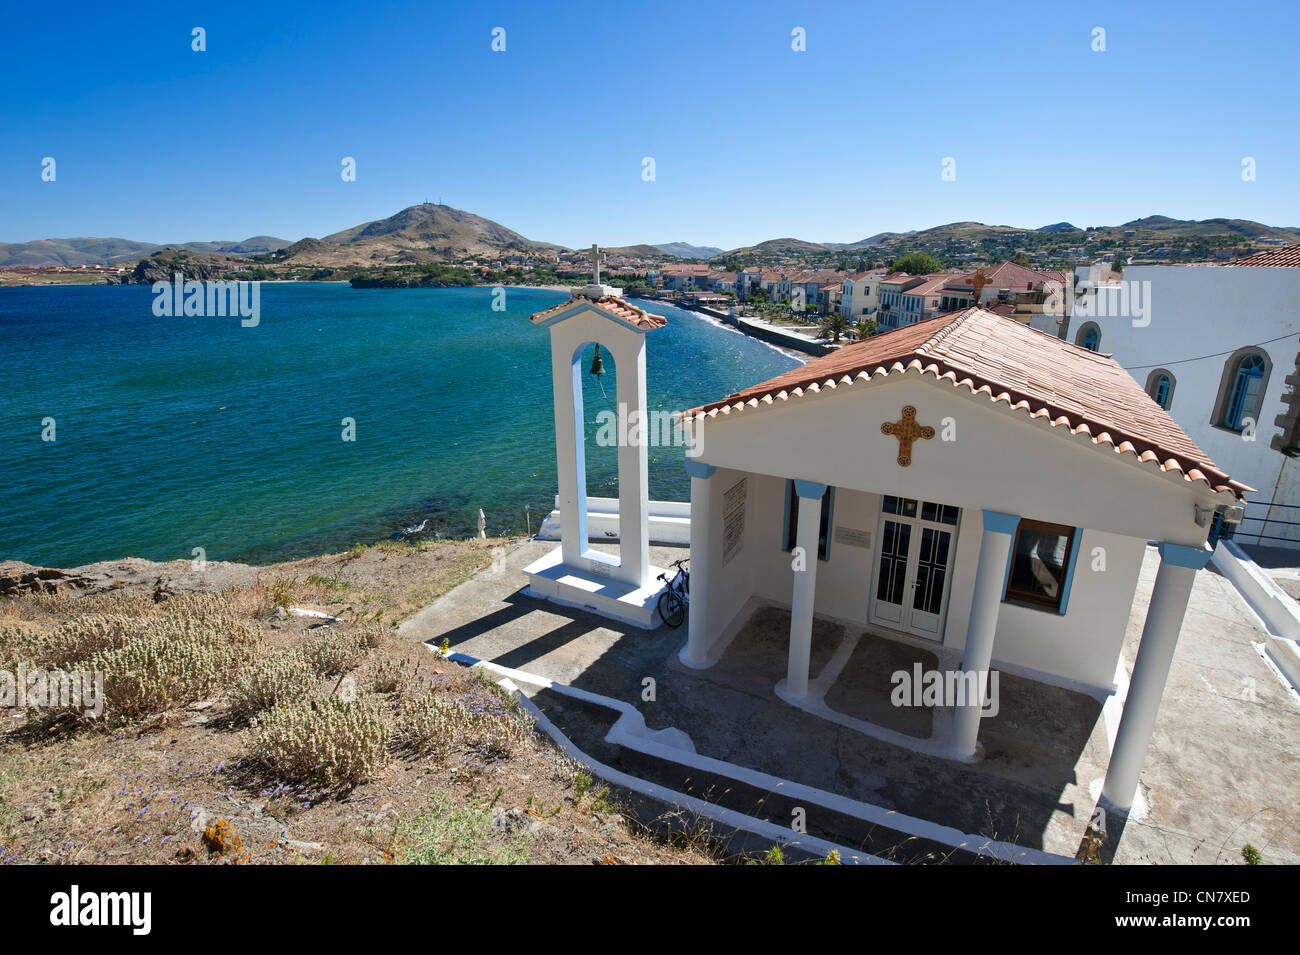 Greece, Lemnos Island, Myrina, capital town and main harbour of the island, the church Agia Paraskevi at the bottom of the Stock Photo